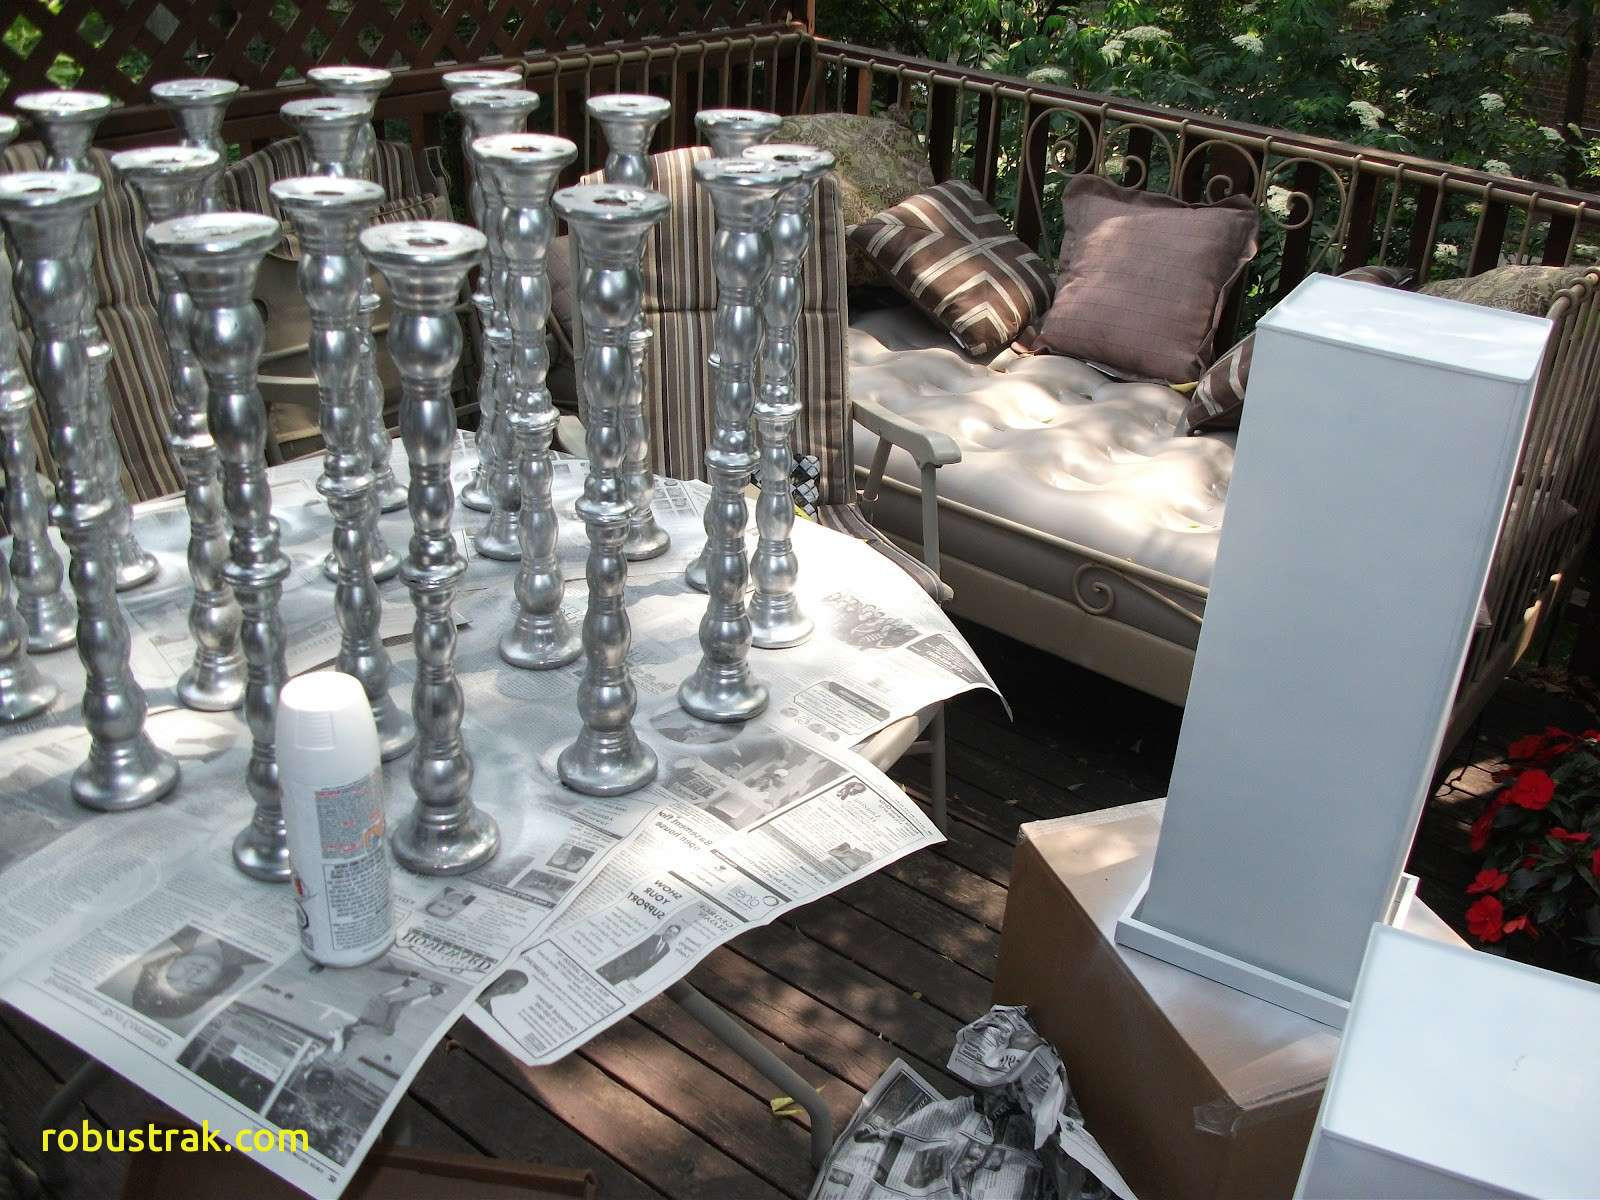 10 Famous Silver Flower Vases Weddings 2024 free download silver flower vases weddings of dollar tree wedding table decorations inspirational dollar tree inside dollar tree wedding table decorations inspirational dollar tree wedding decorations awe